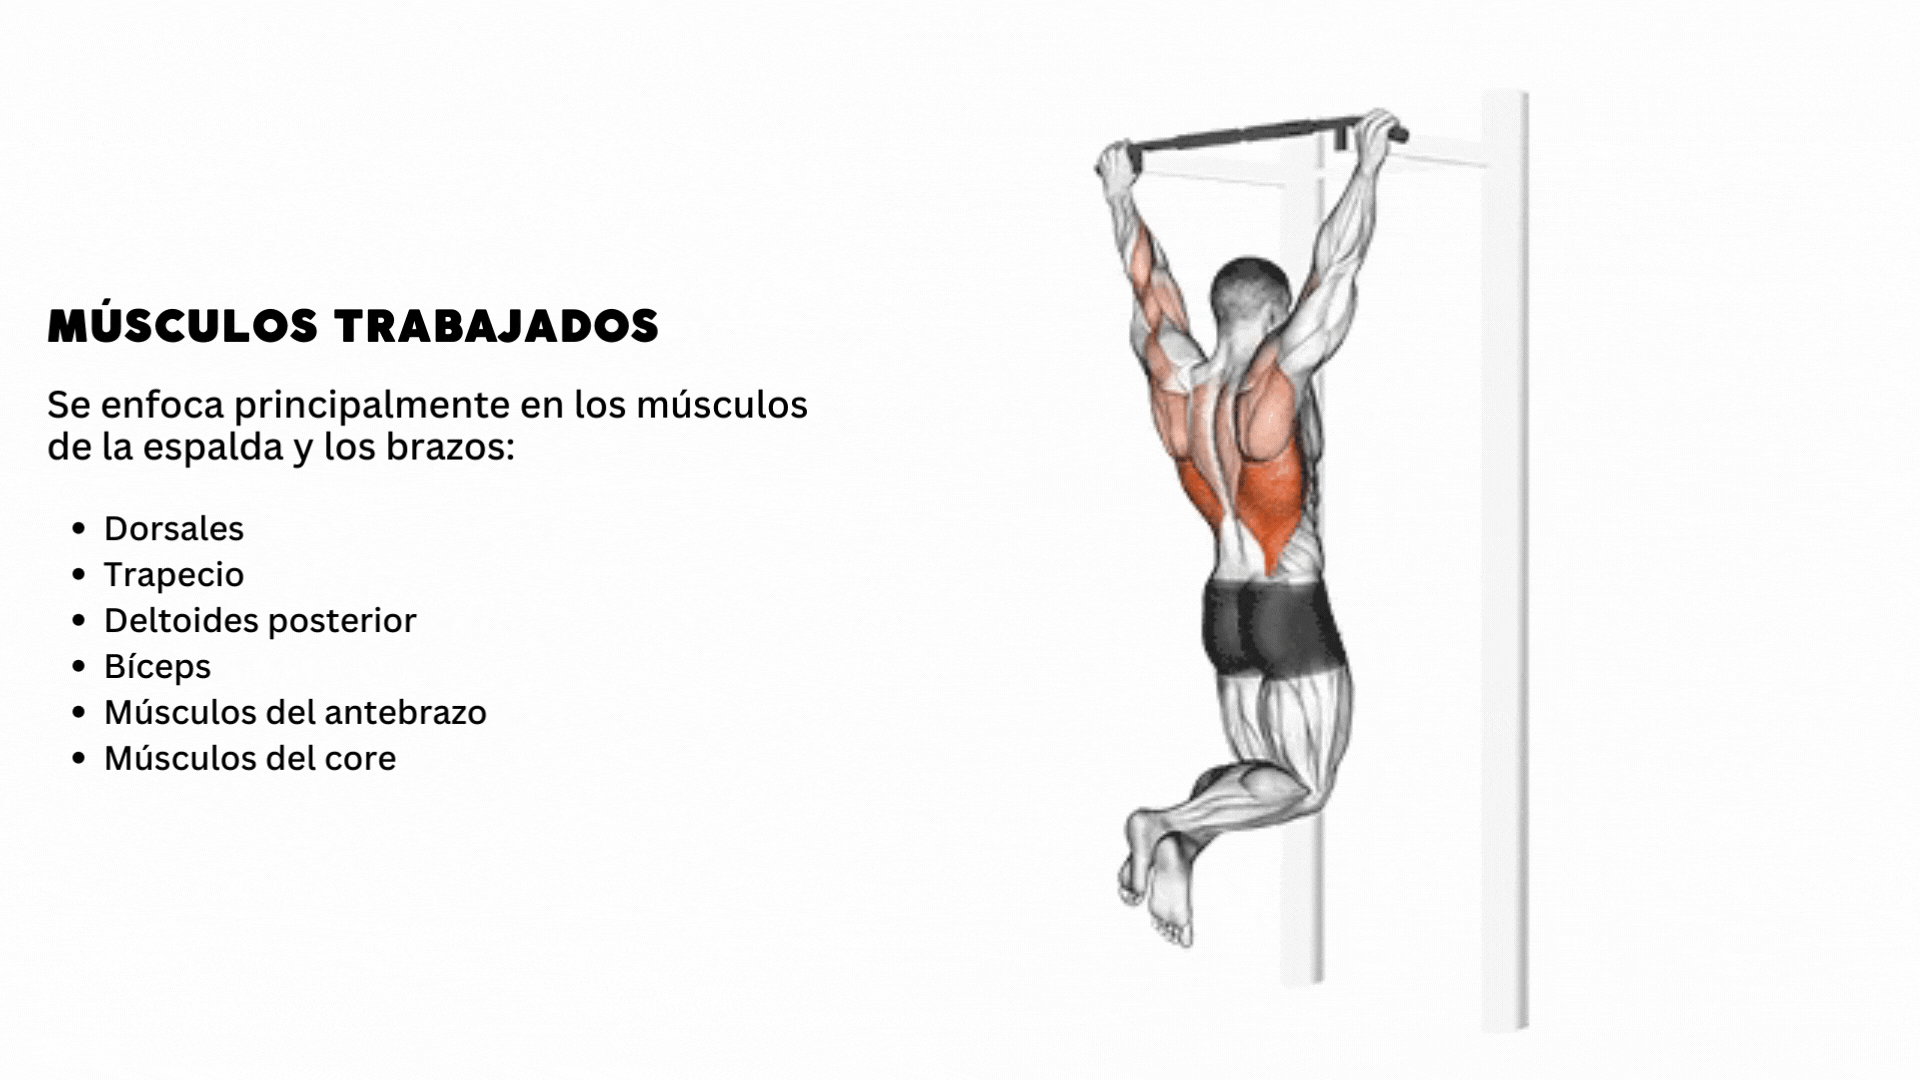 How to do pull-ups together with the muscles they work